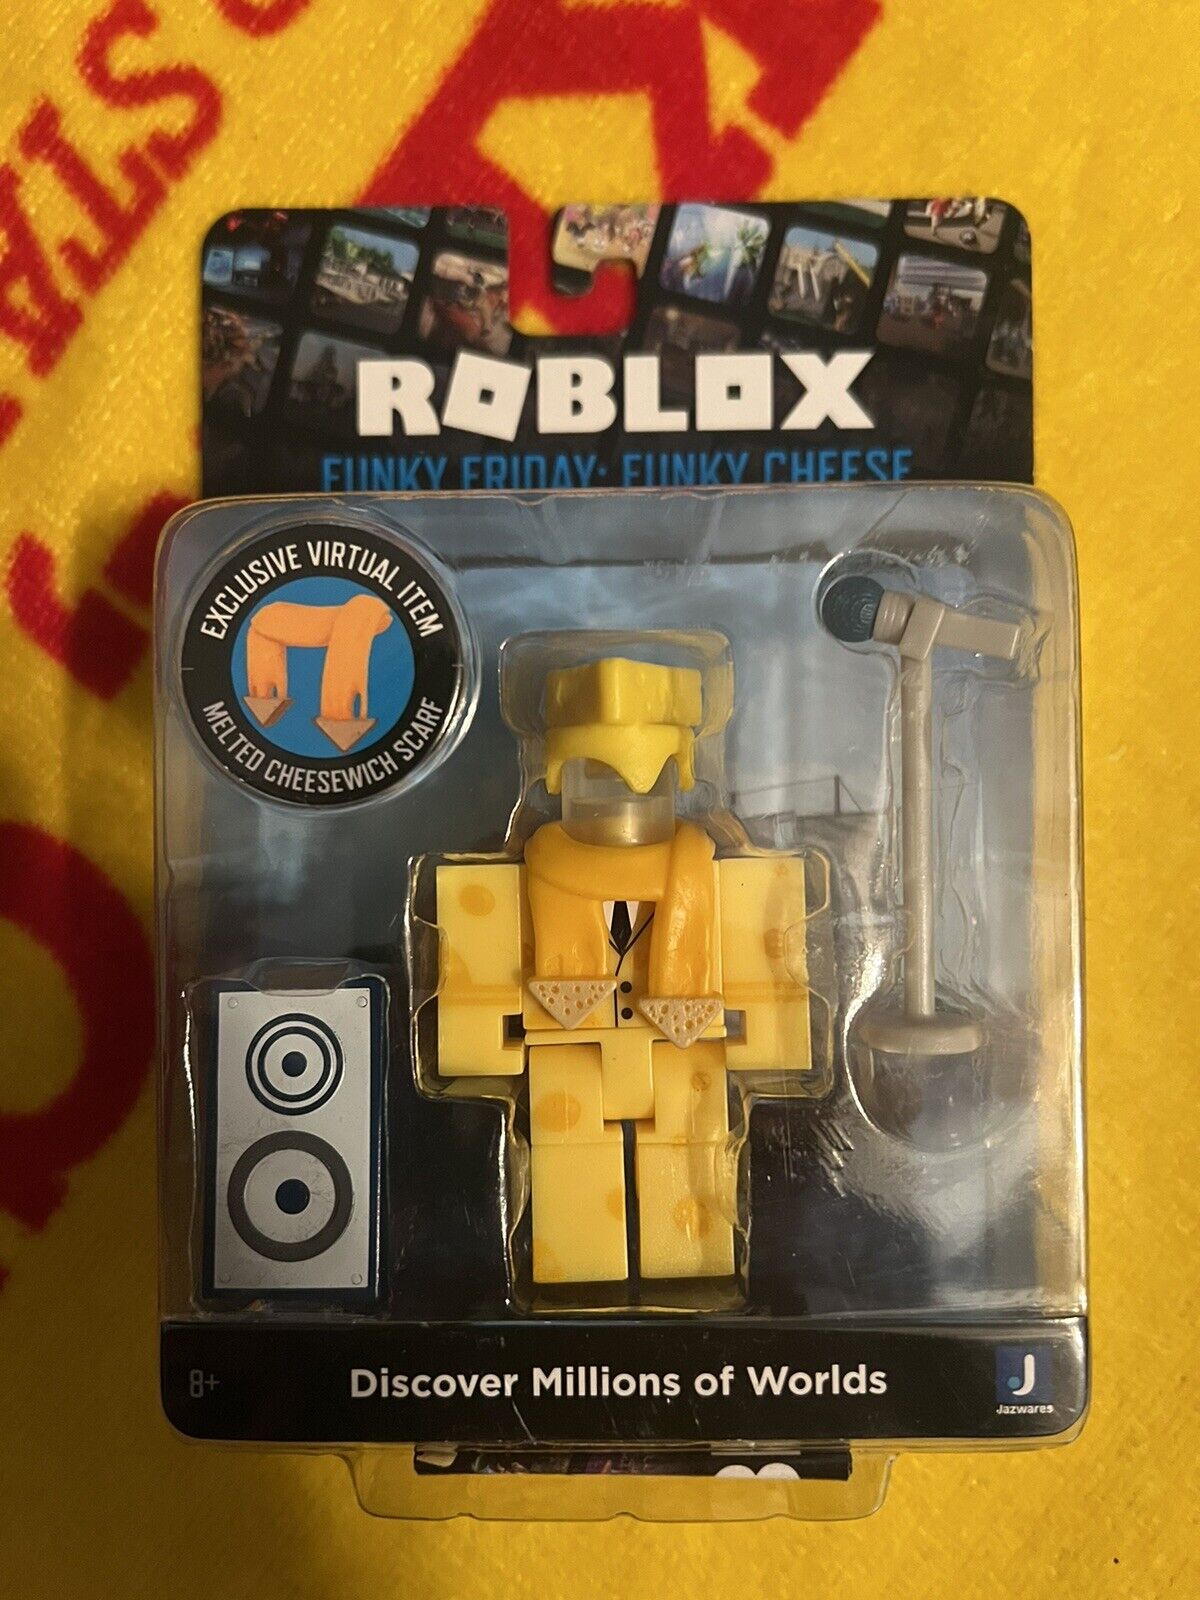 ROBLOX Funky Friday: Funky Cheese 3” Figure w/ Exclusive Virtual Item Game Code